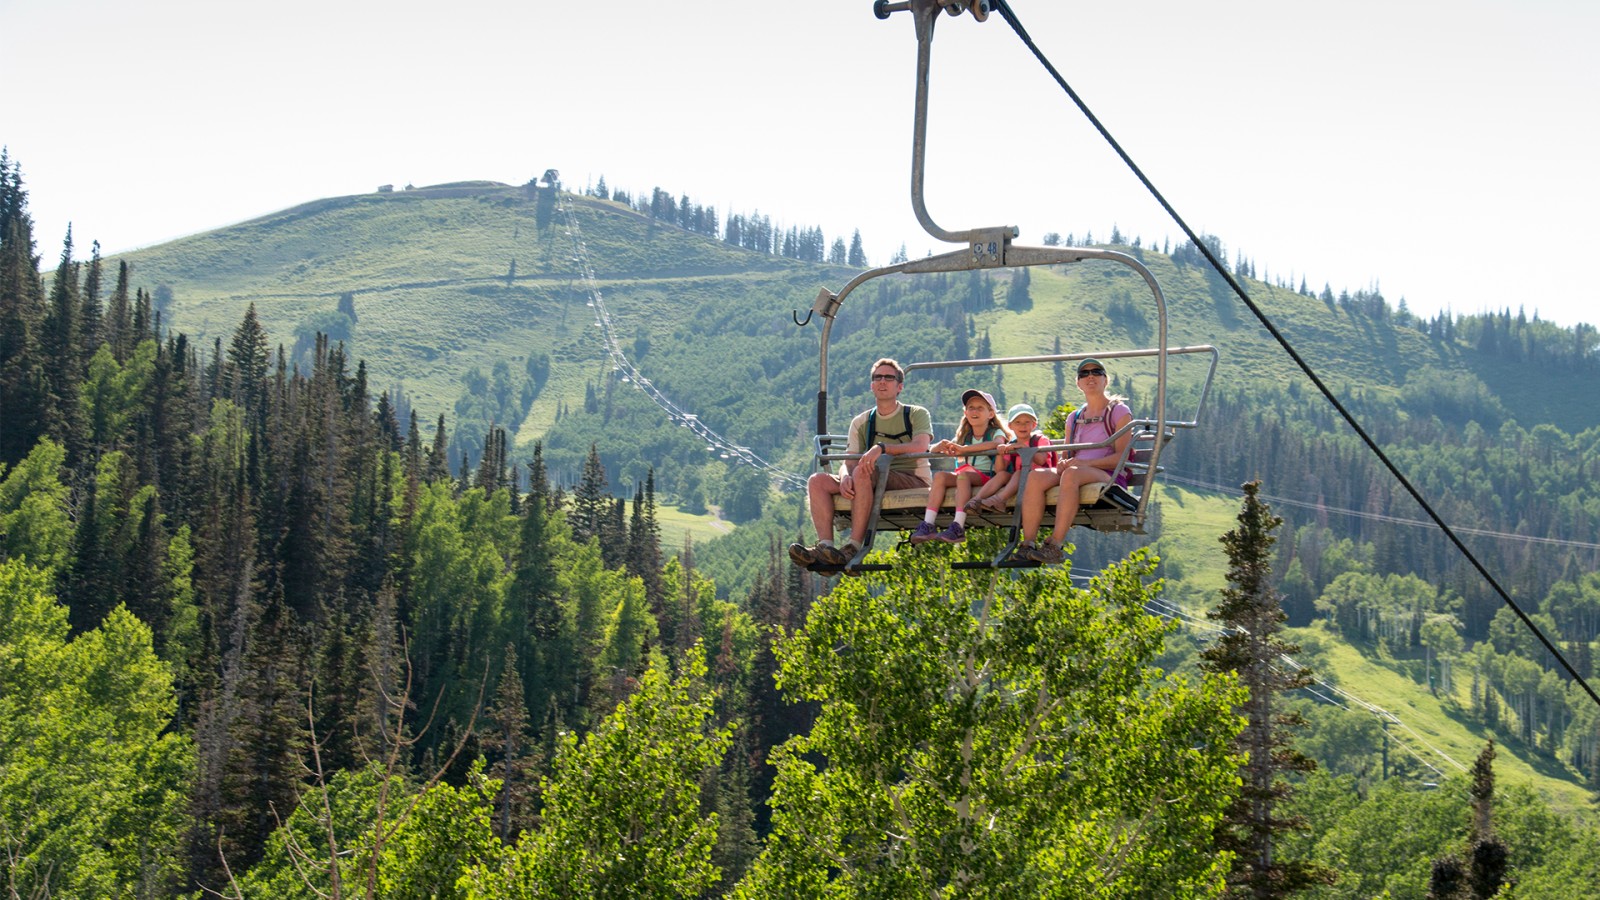 deer-valley-scenic-chairlift-ridespng